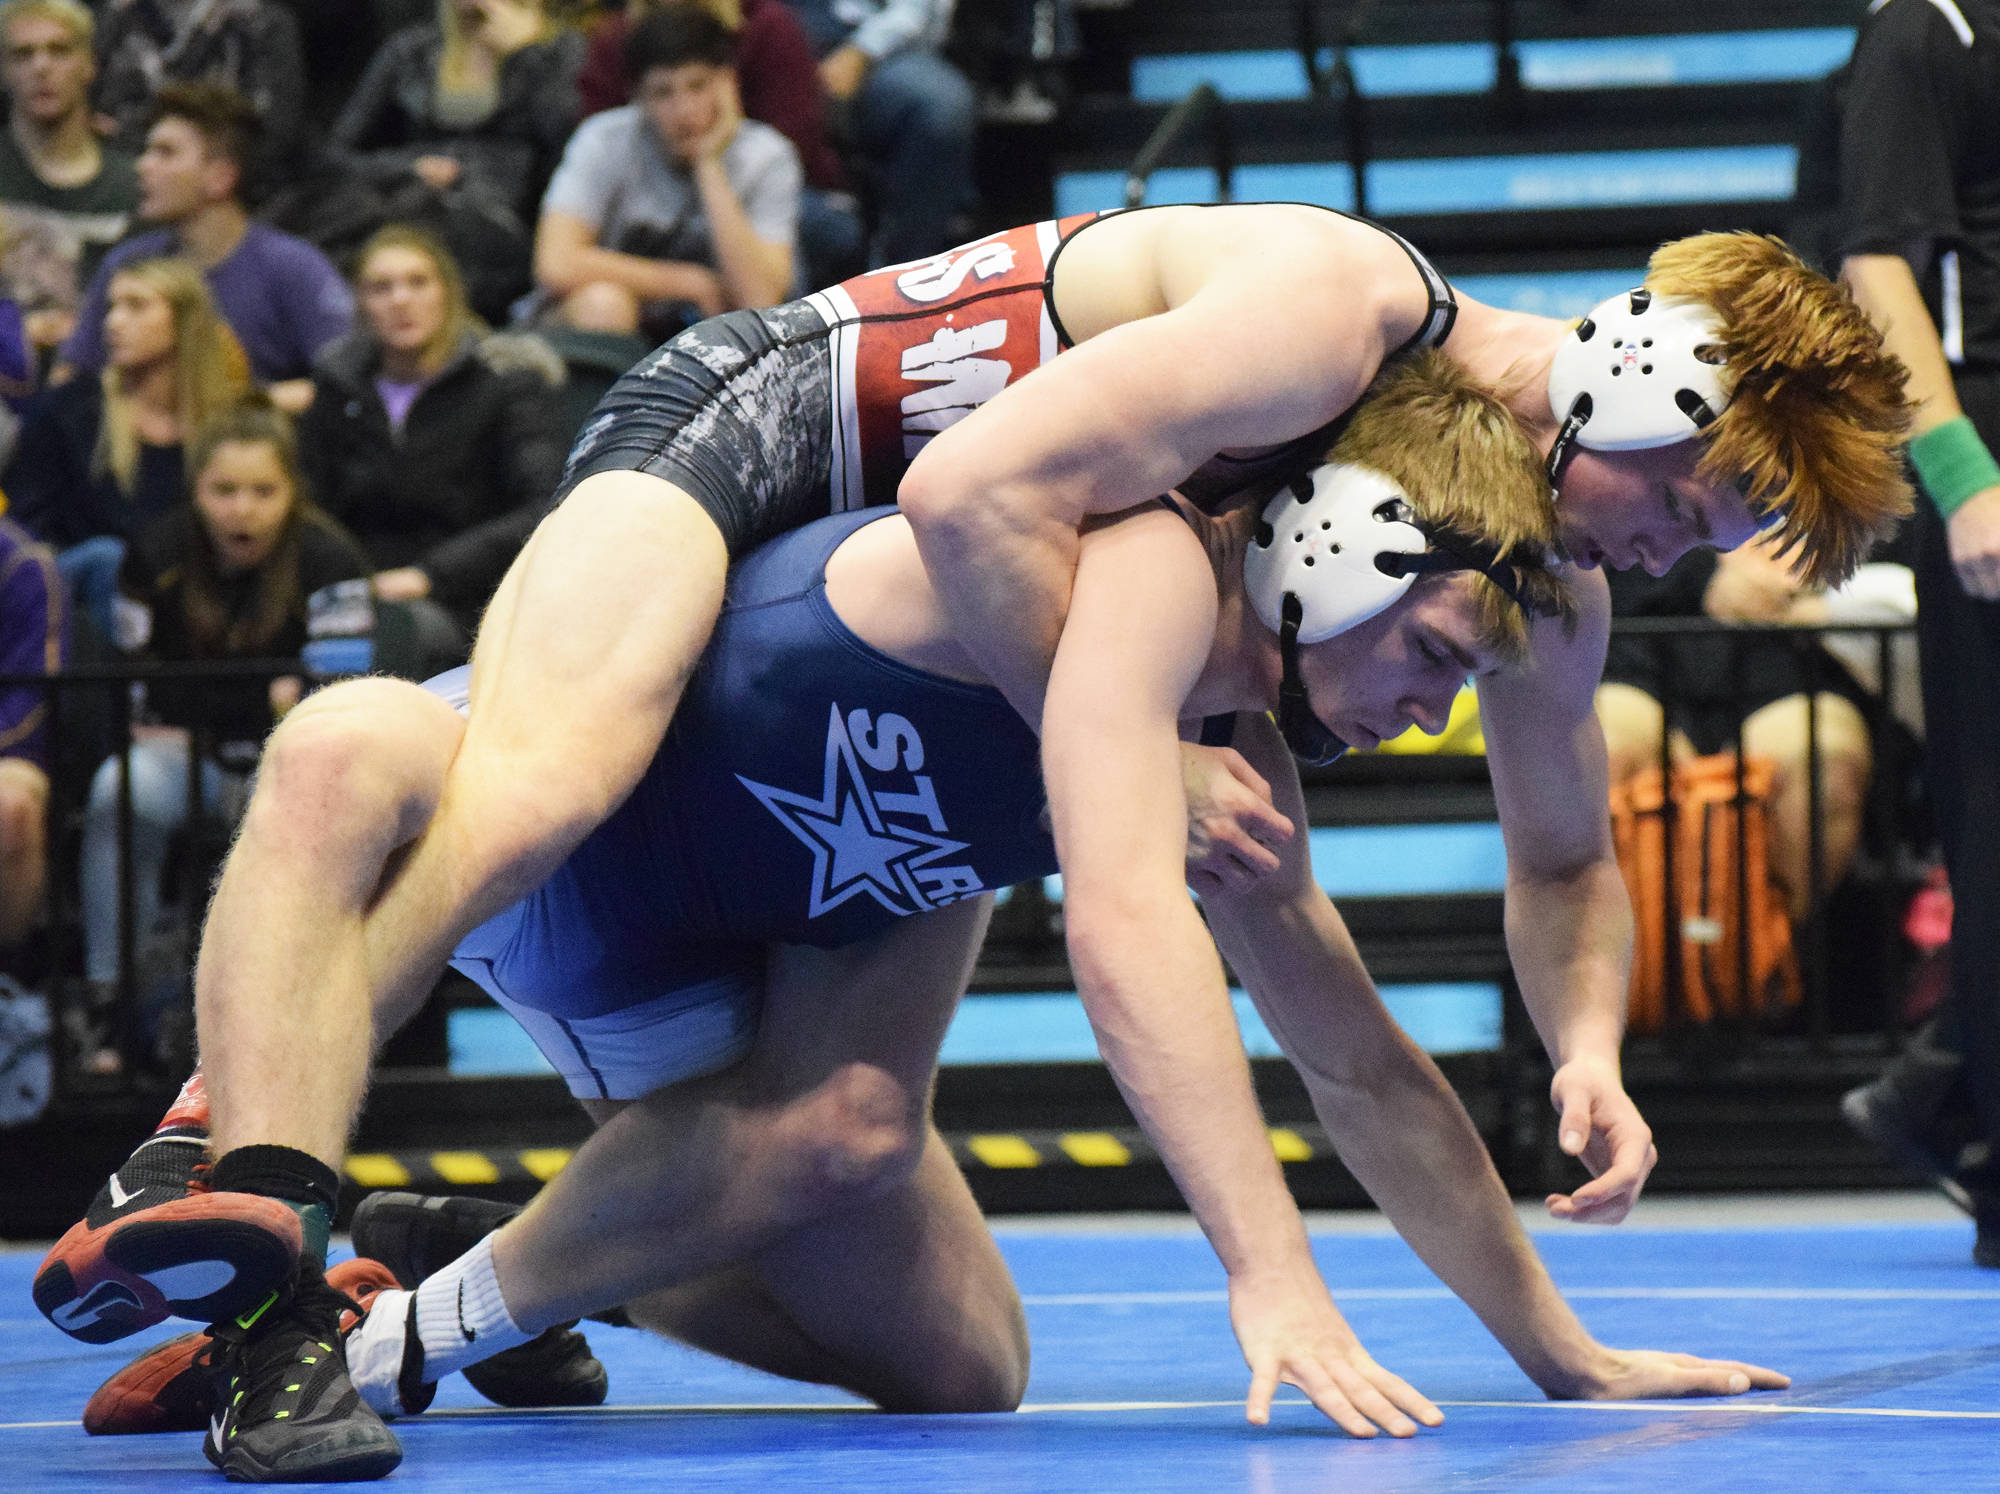 Soldotna’s Bechler Metcalf (bottom) fights against Wasilla’s Andrue Shepersky in the 152-pound final Saturday night at the Division I state wrestling championships at the Alaska Airlines Center in Anchorage. (Photo by Joey Klecka/Peninsula Clarion)